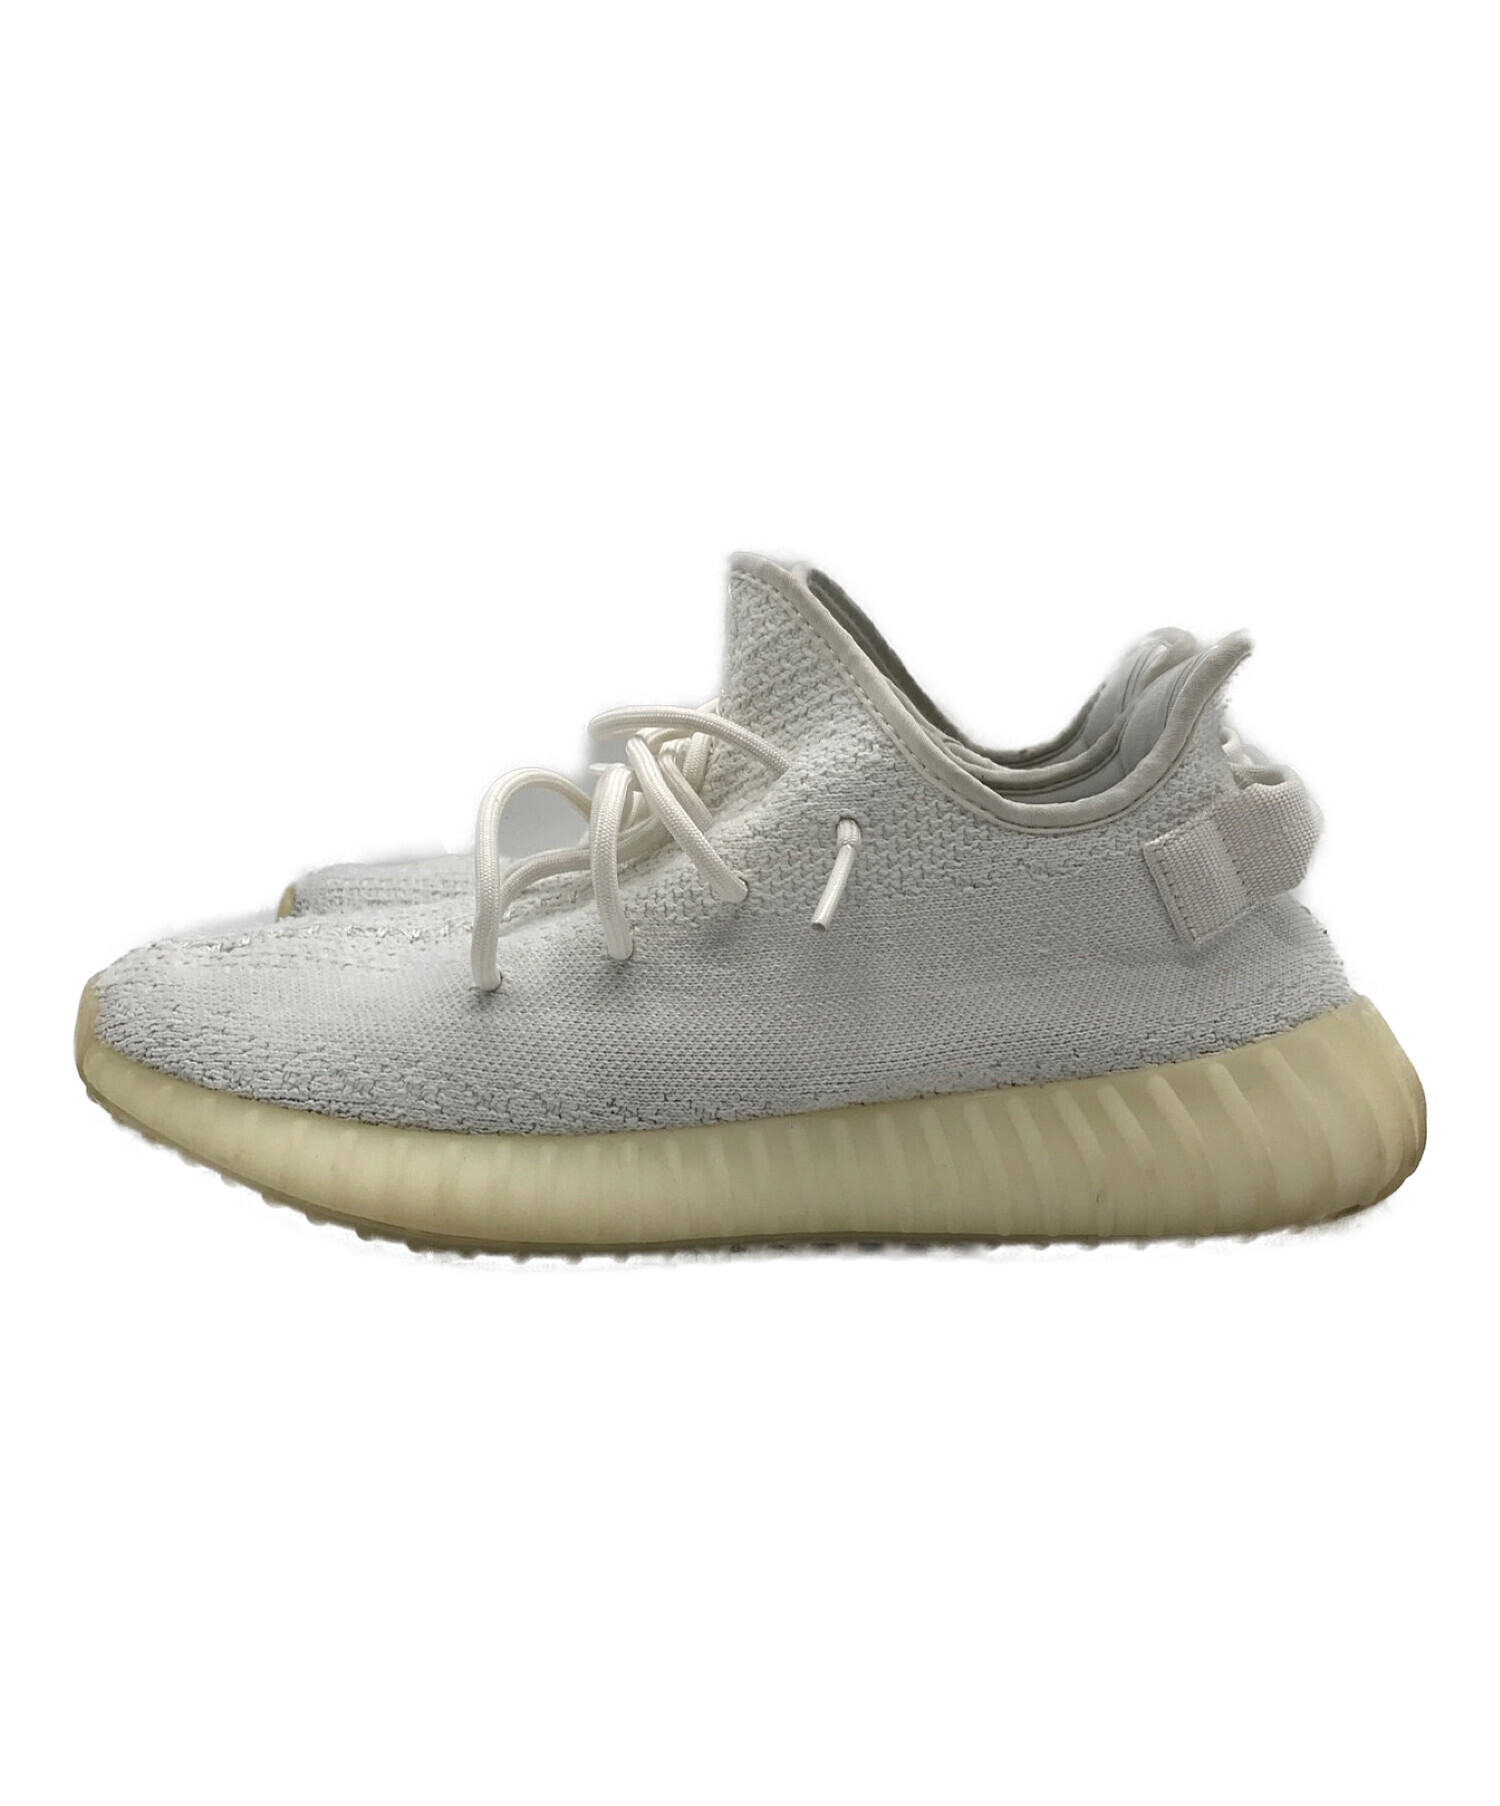 YEEZY BOOST 350 V2 ADULTS 25.5cm